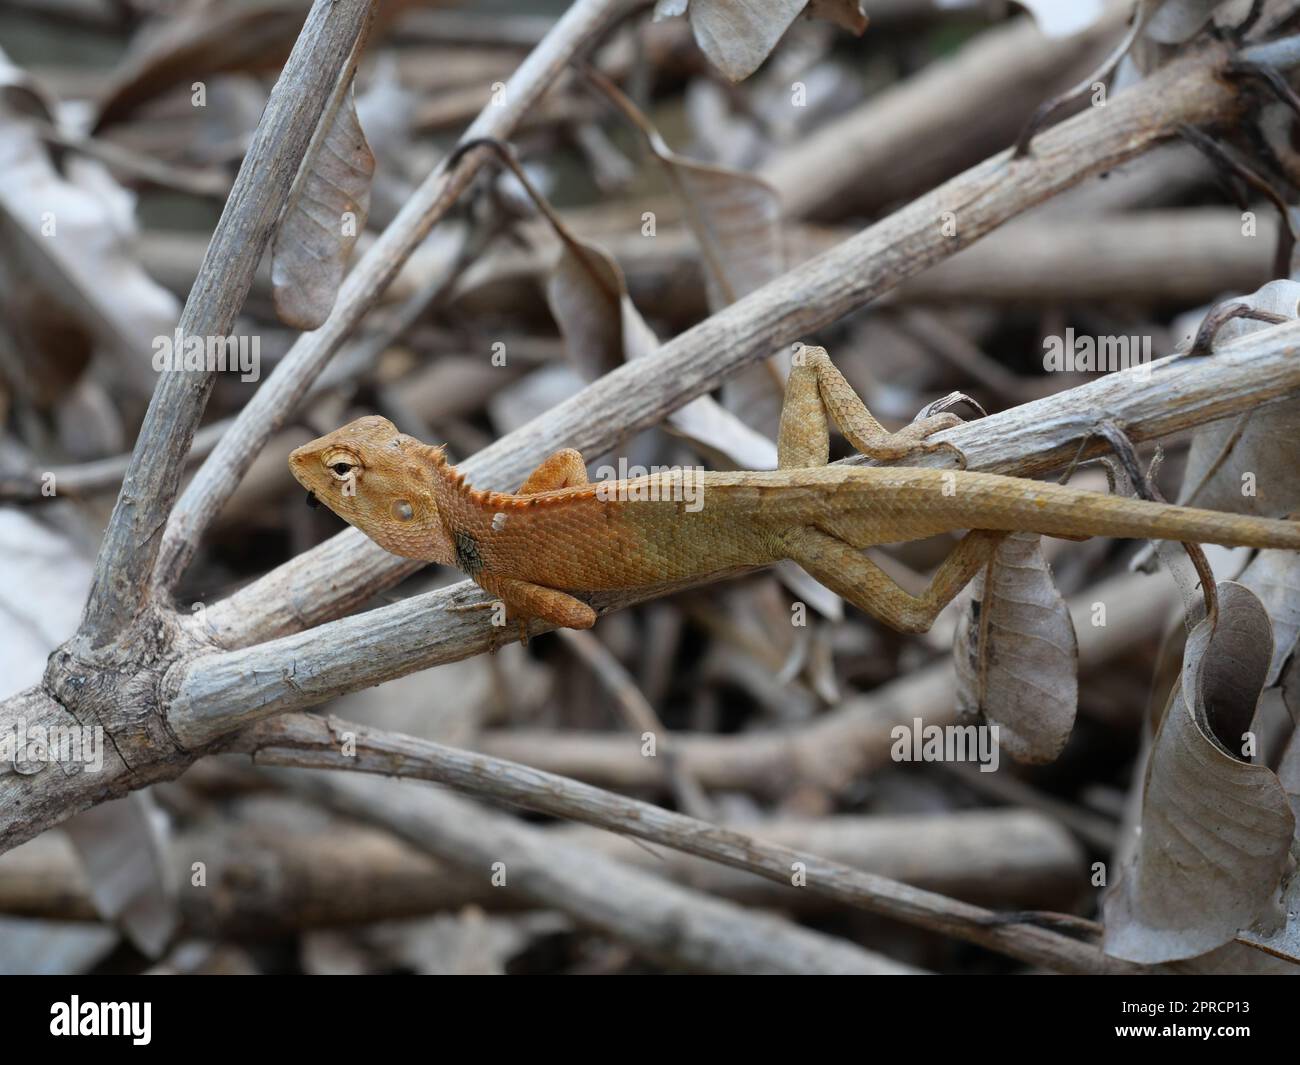 Male Oriental garden or Eastern garden or Changeable lizard on a branch with natural brown lbackground., Lizard in Thailand Stock Photo